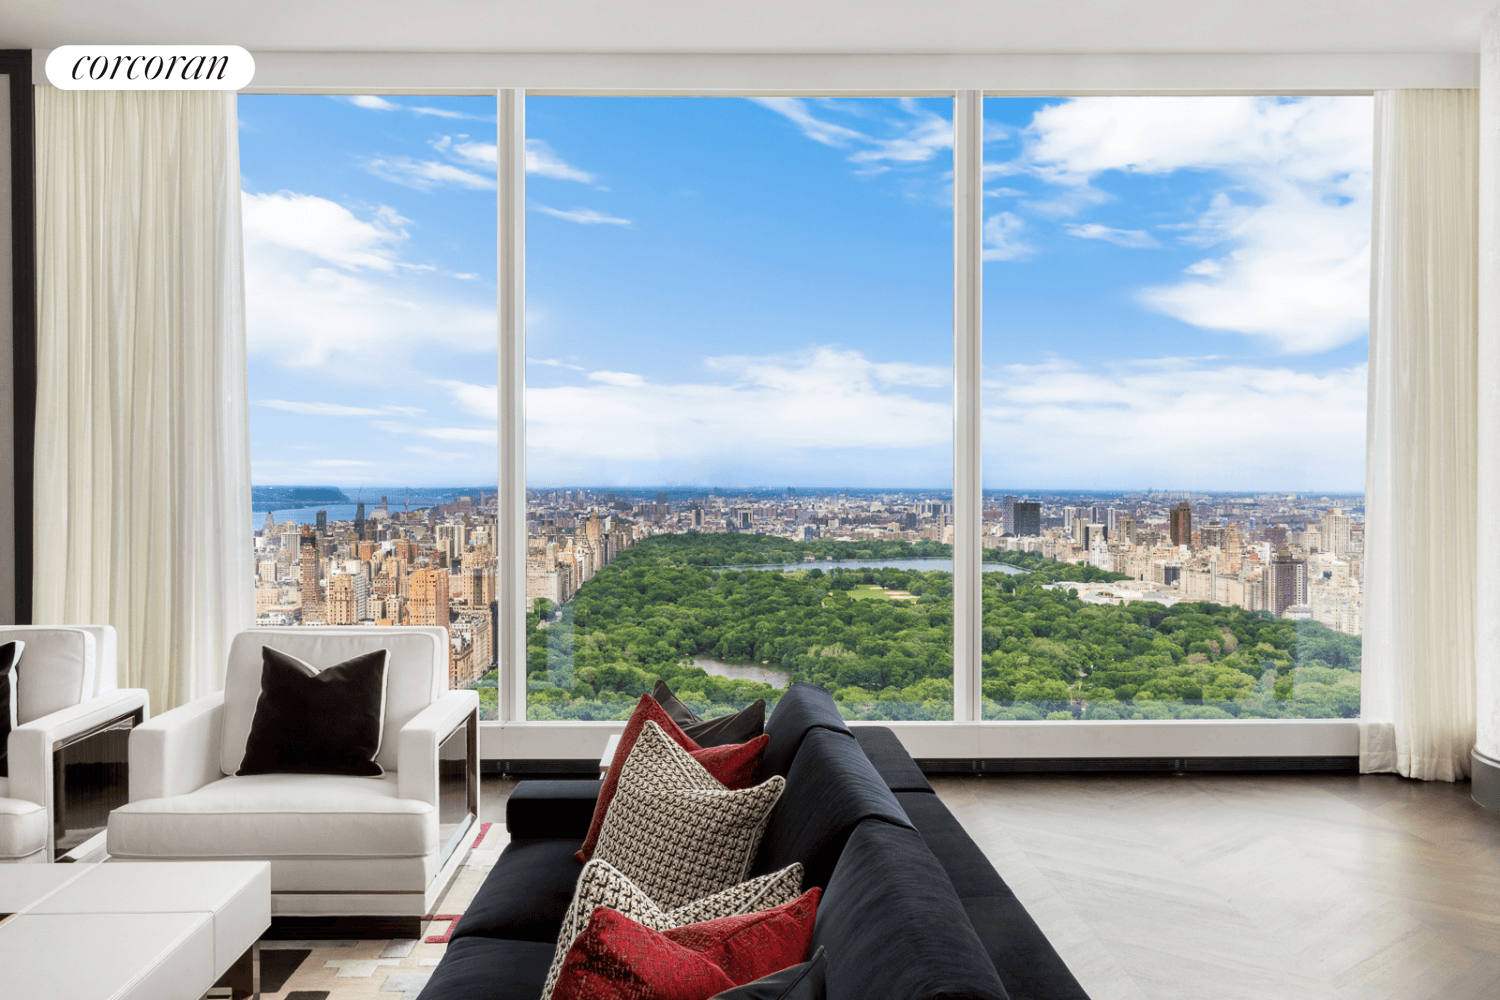 This three bedroom, three and one half bathroom residence at Central Park Tower offers gracious living enhanced by quintessential Central Park views from an elevation over 640 feet.